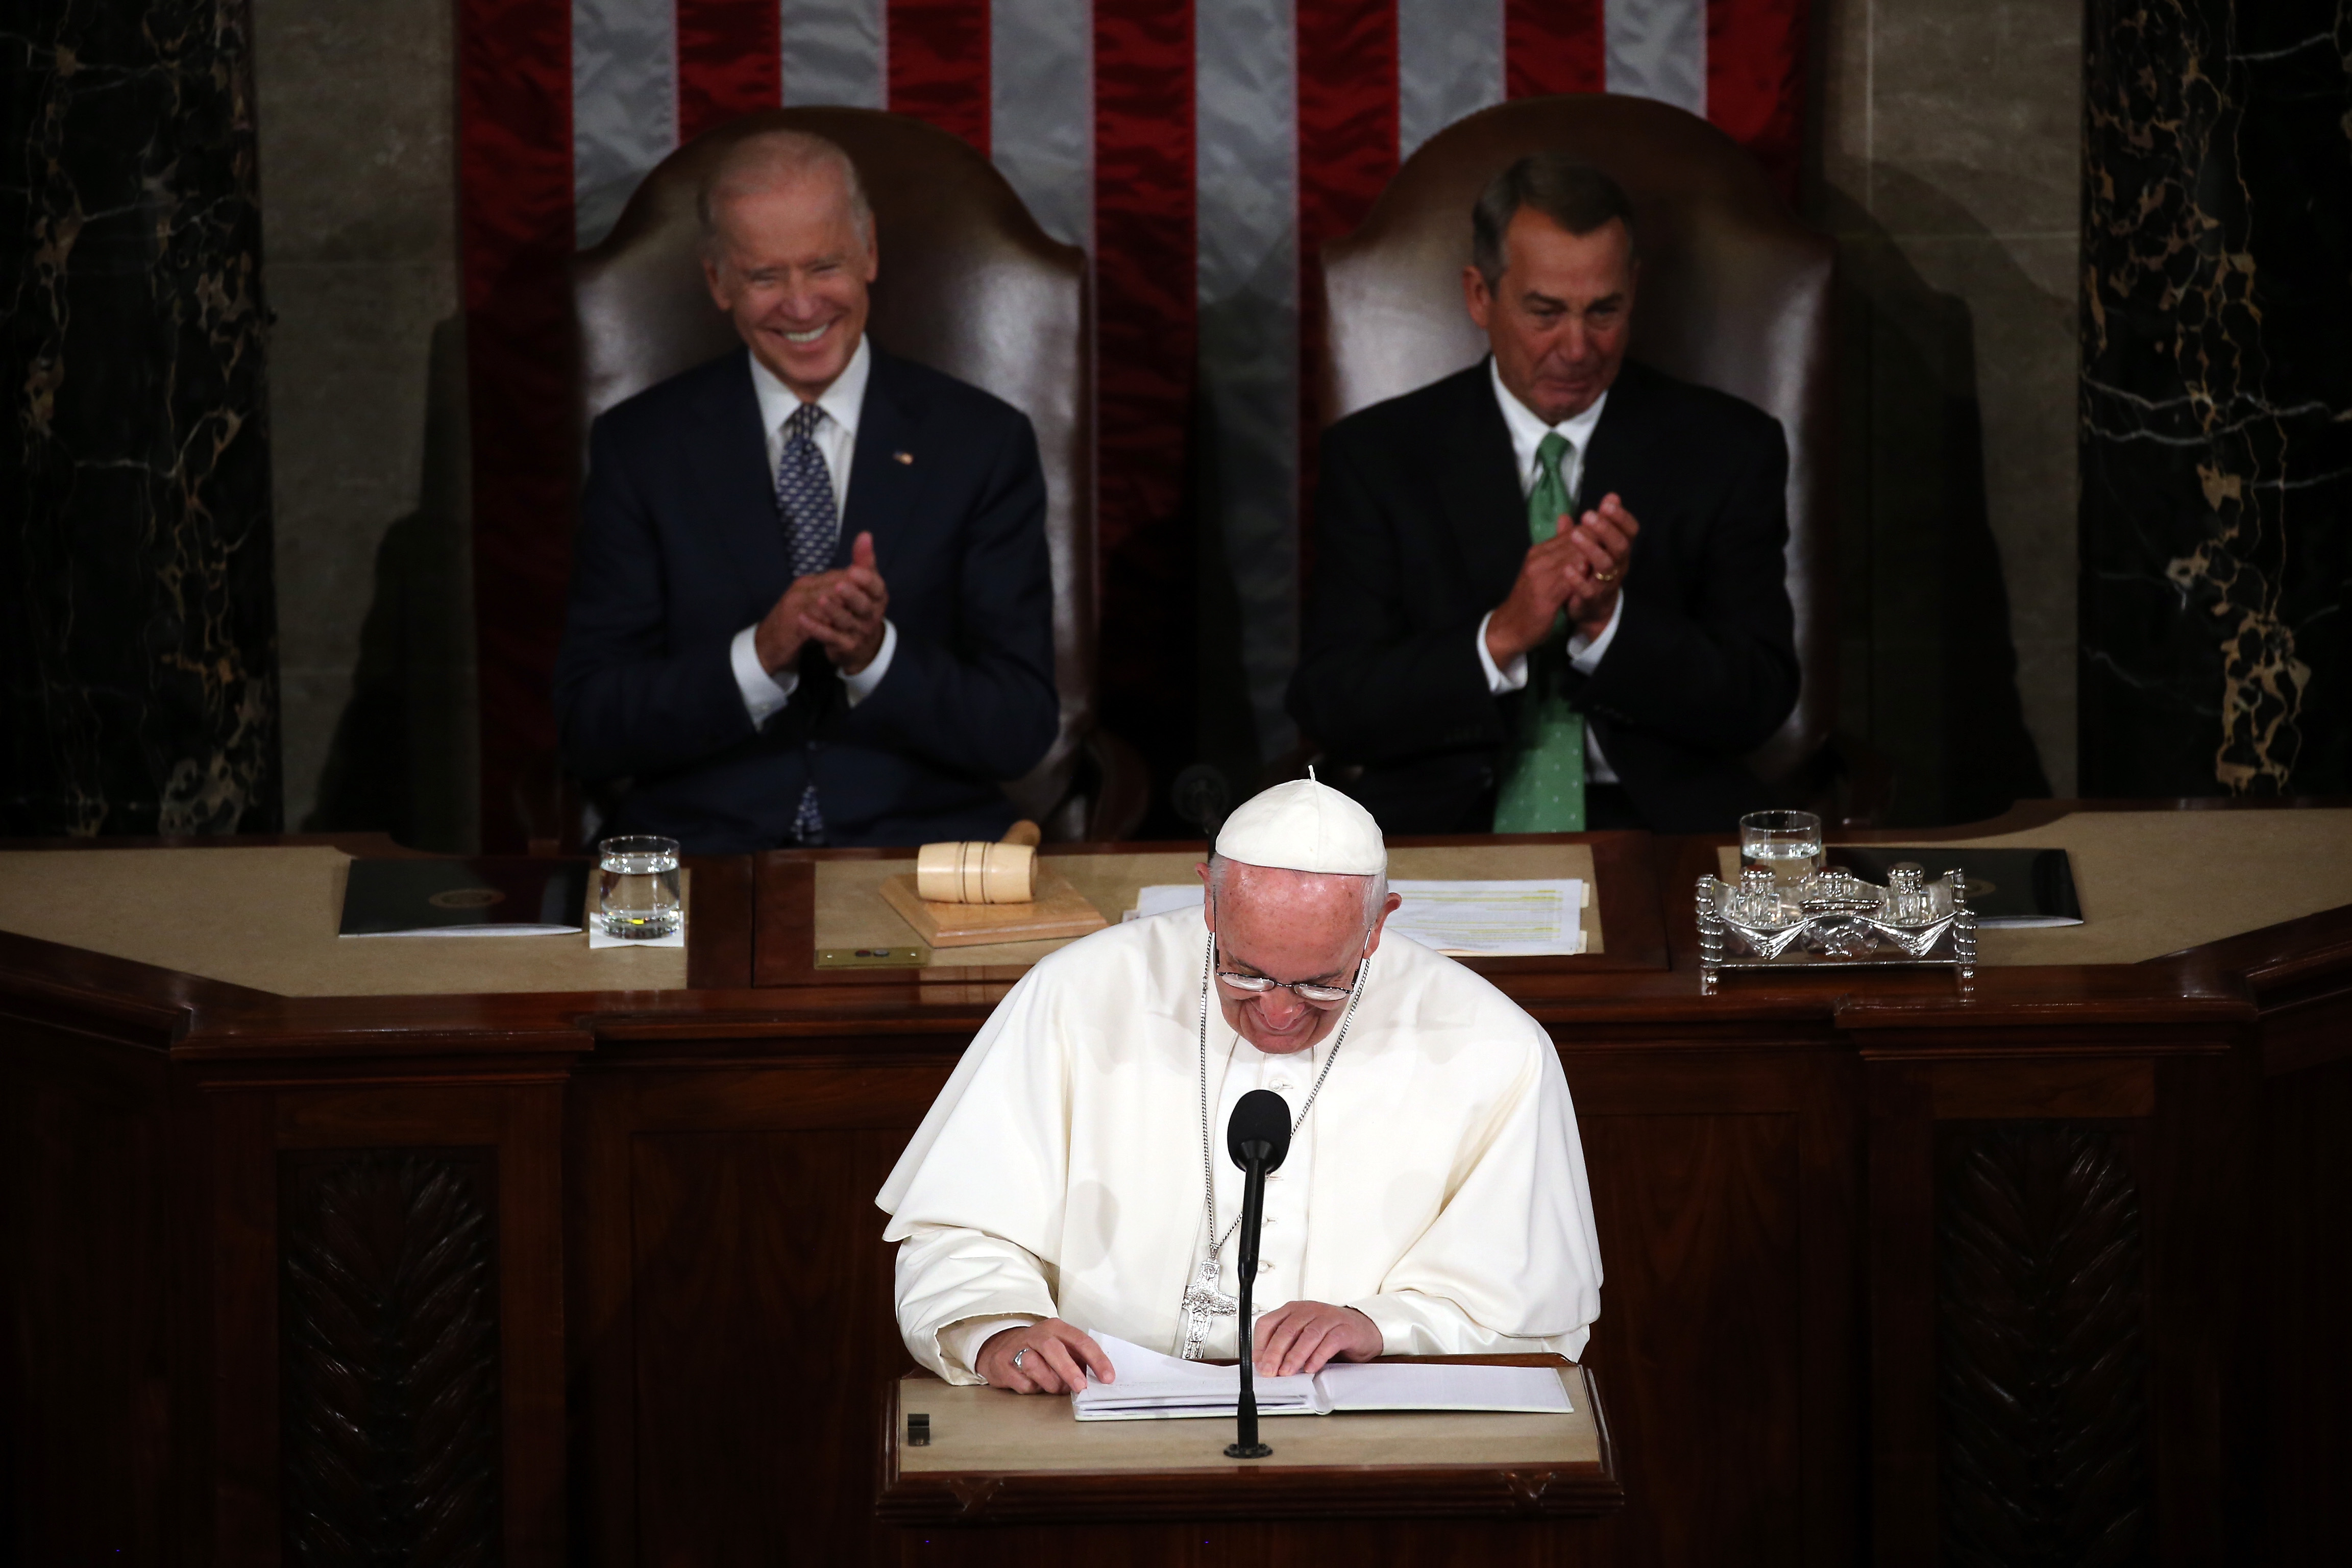 Pope Francis addresses a joint meeting of the U.S. Congress with with Vice President Joe Biden (L) and Speaker of the House John Boehner (R-OH) in the House Chamber of the U.S. Capitol in Washington, D.C., on Sept. 24, 2015.